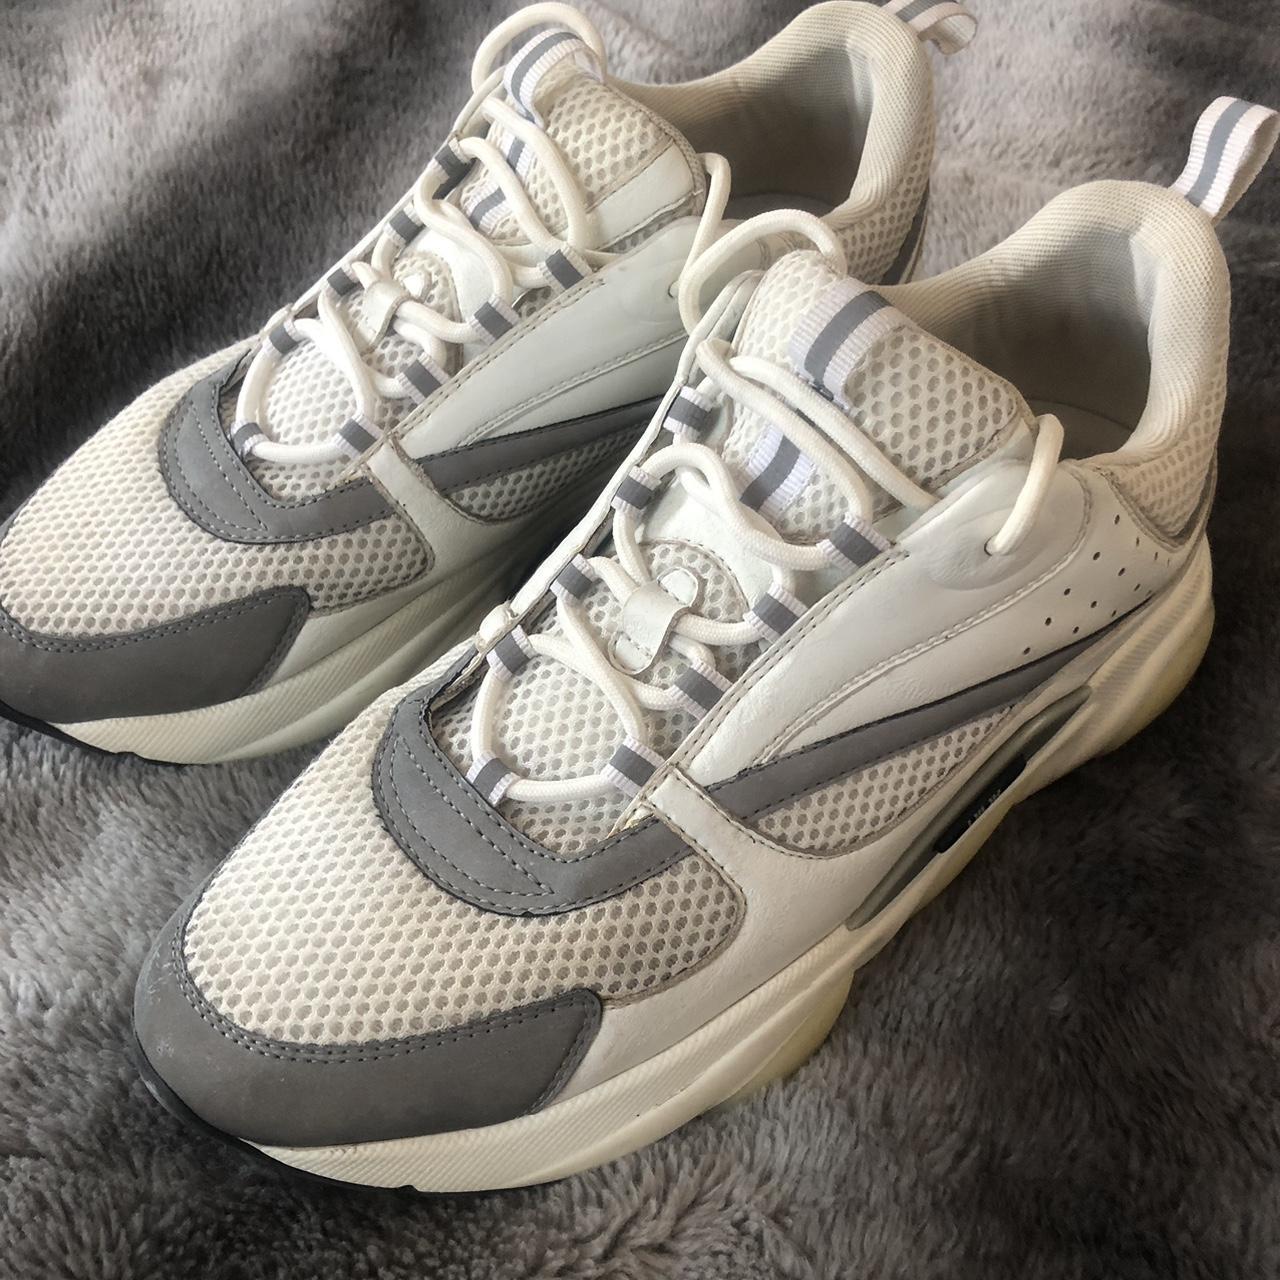 Dior Men's White and Silver Trainers | Depop